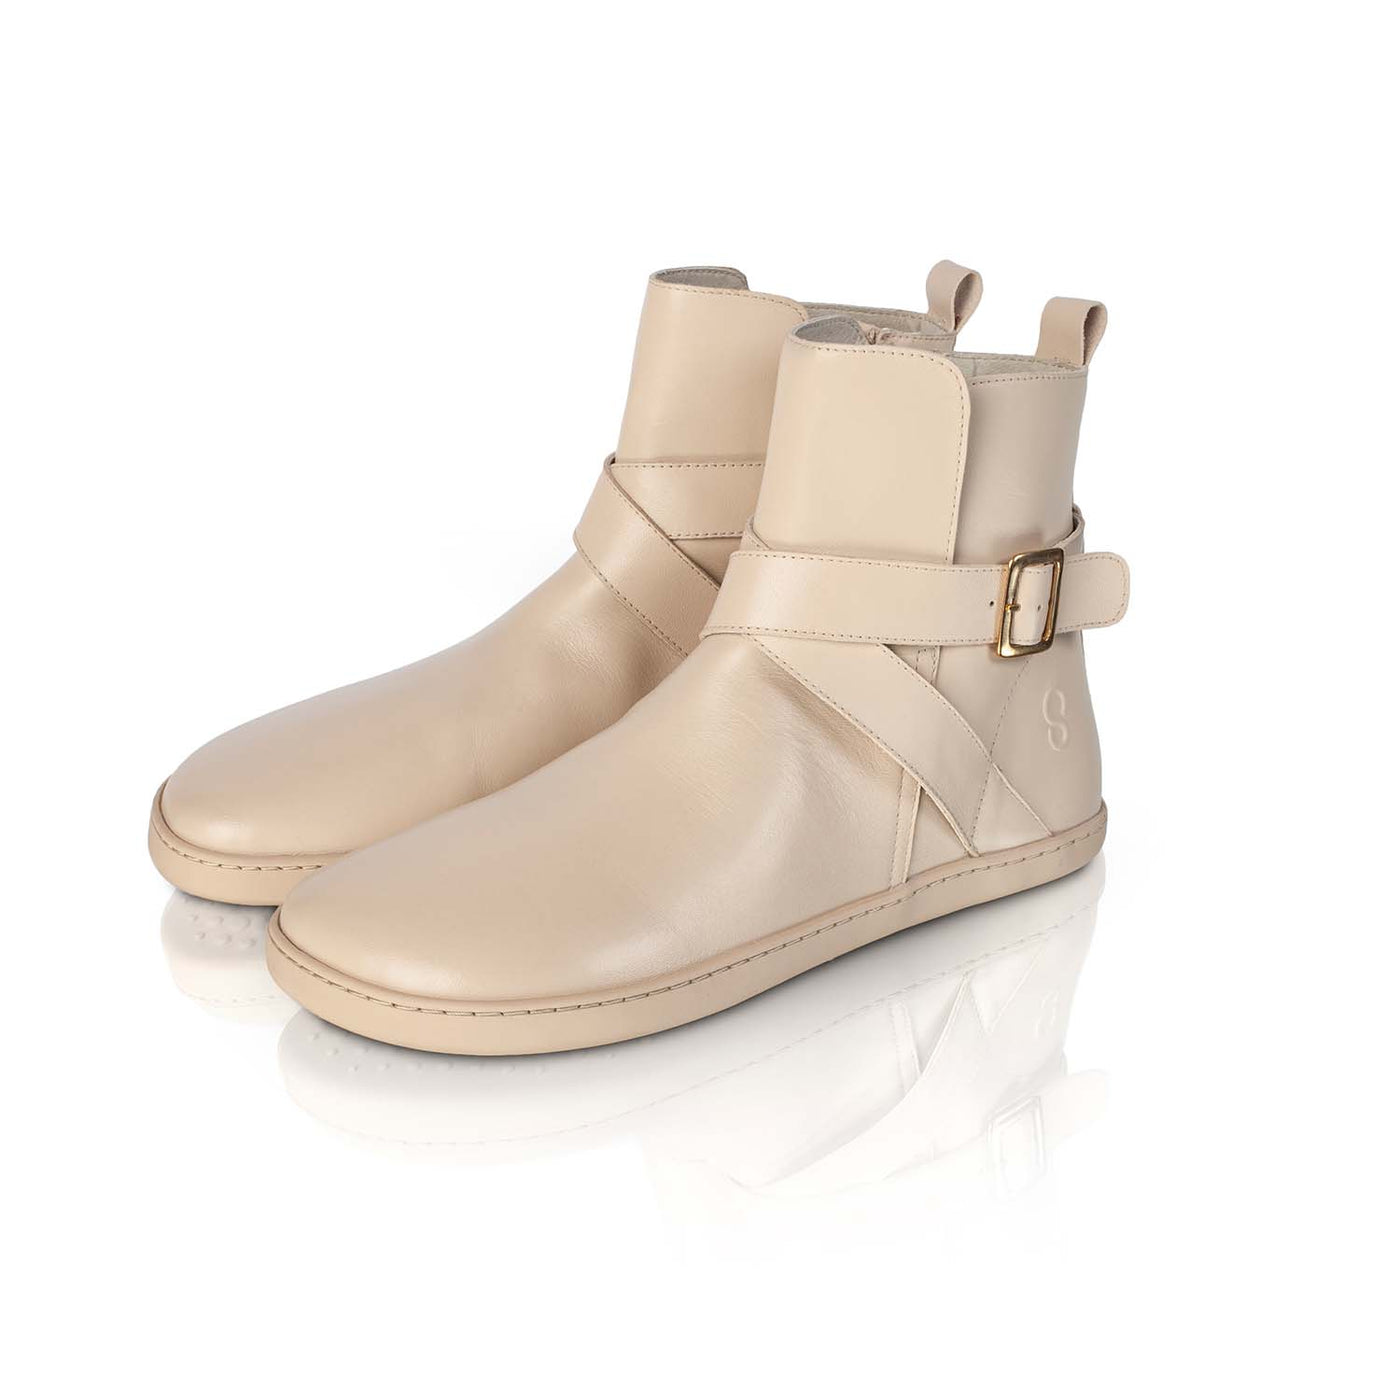 A photo of the Shapen Divine ankle boots made with a smooth leather upper, a microline lining, and rubber soles. The boots are vanilla in color and have an ankle strap with a gold buckle, as well as a side zipper. Both boots are shown together from the front left on a white background. #color_vanilla